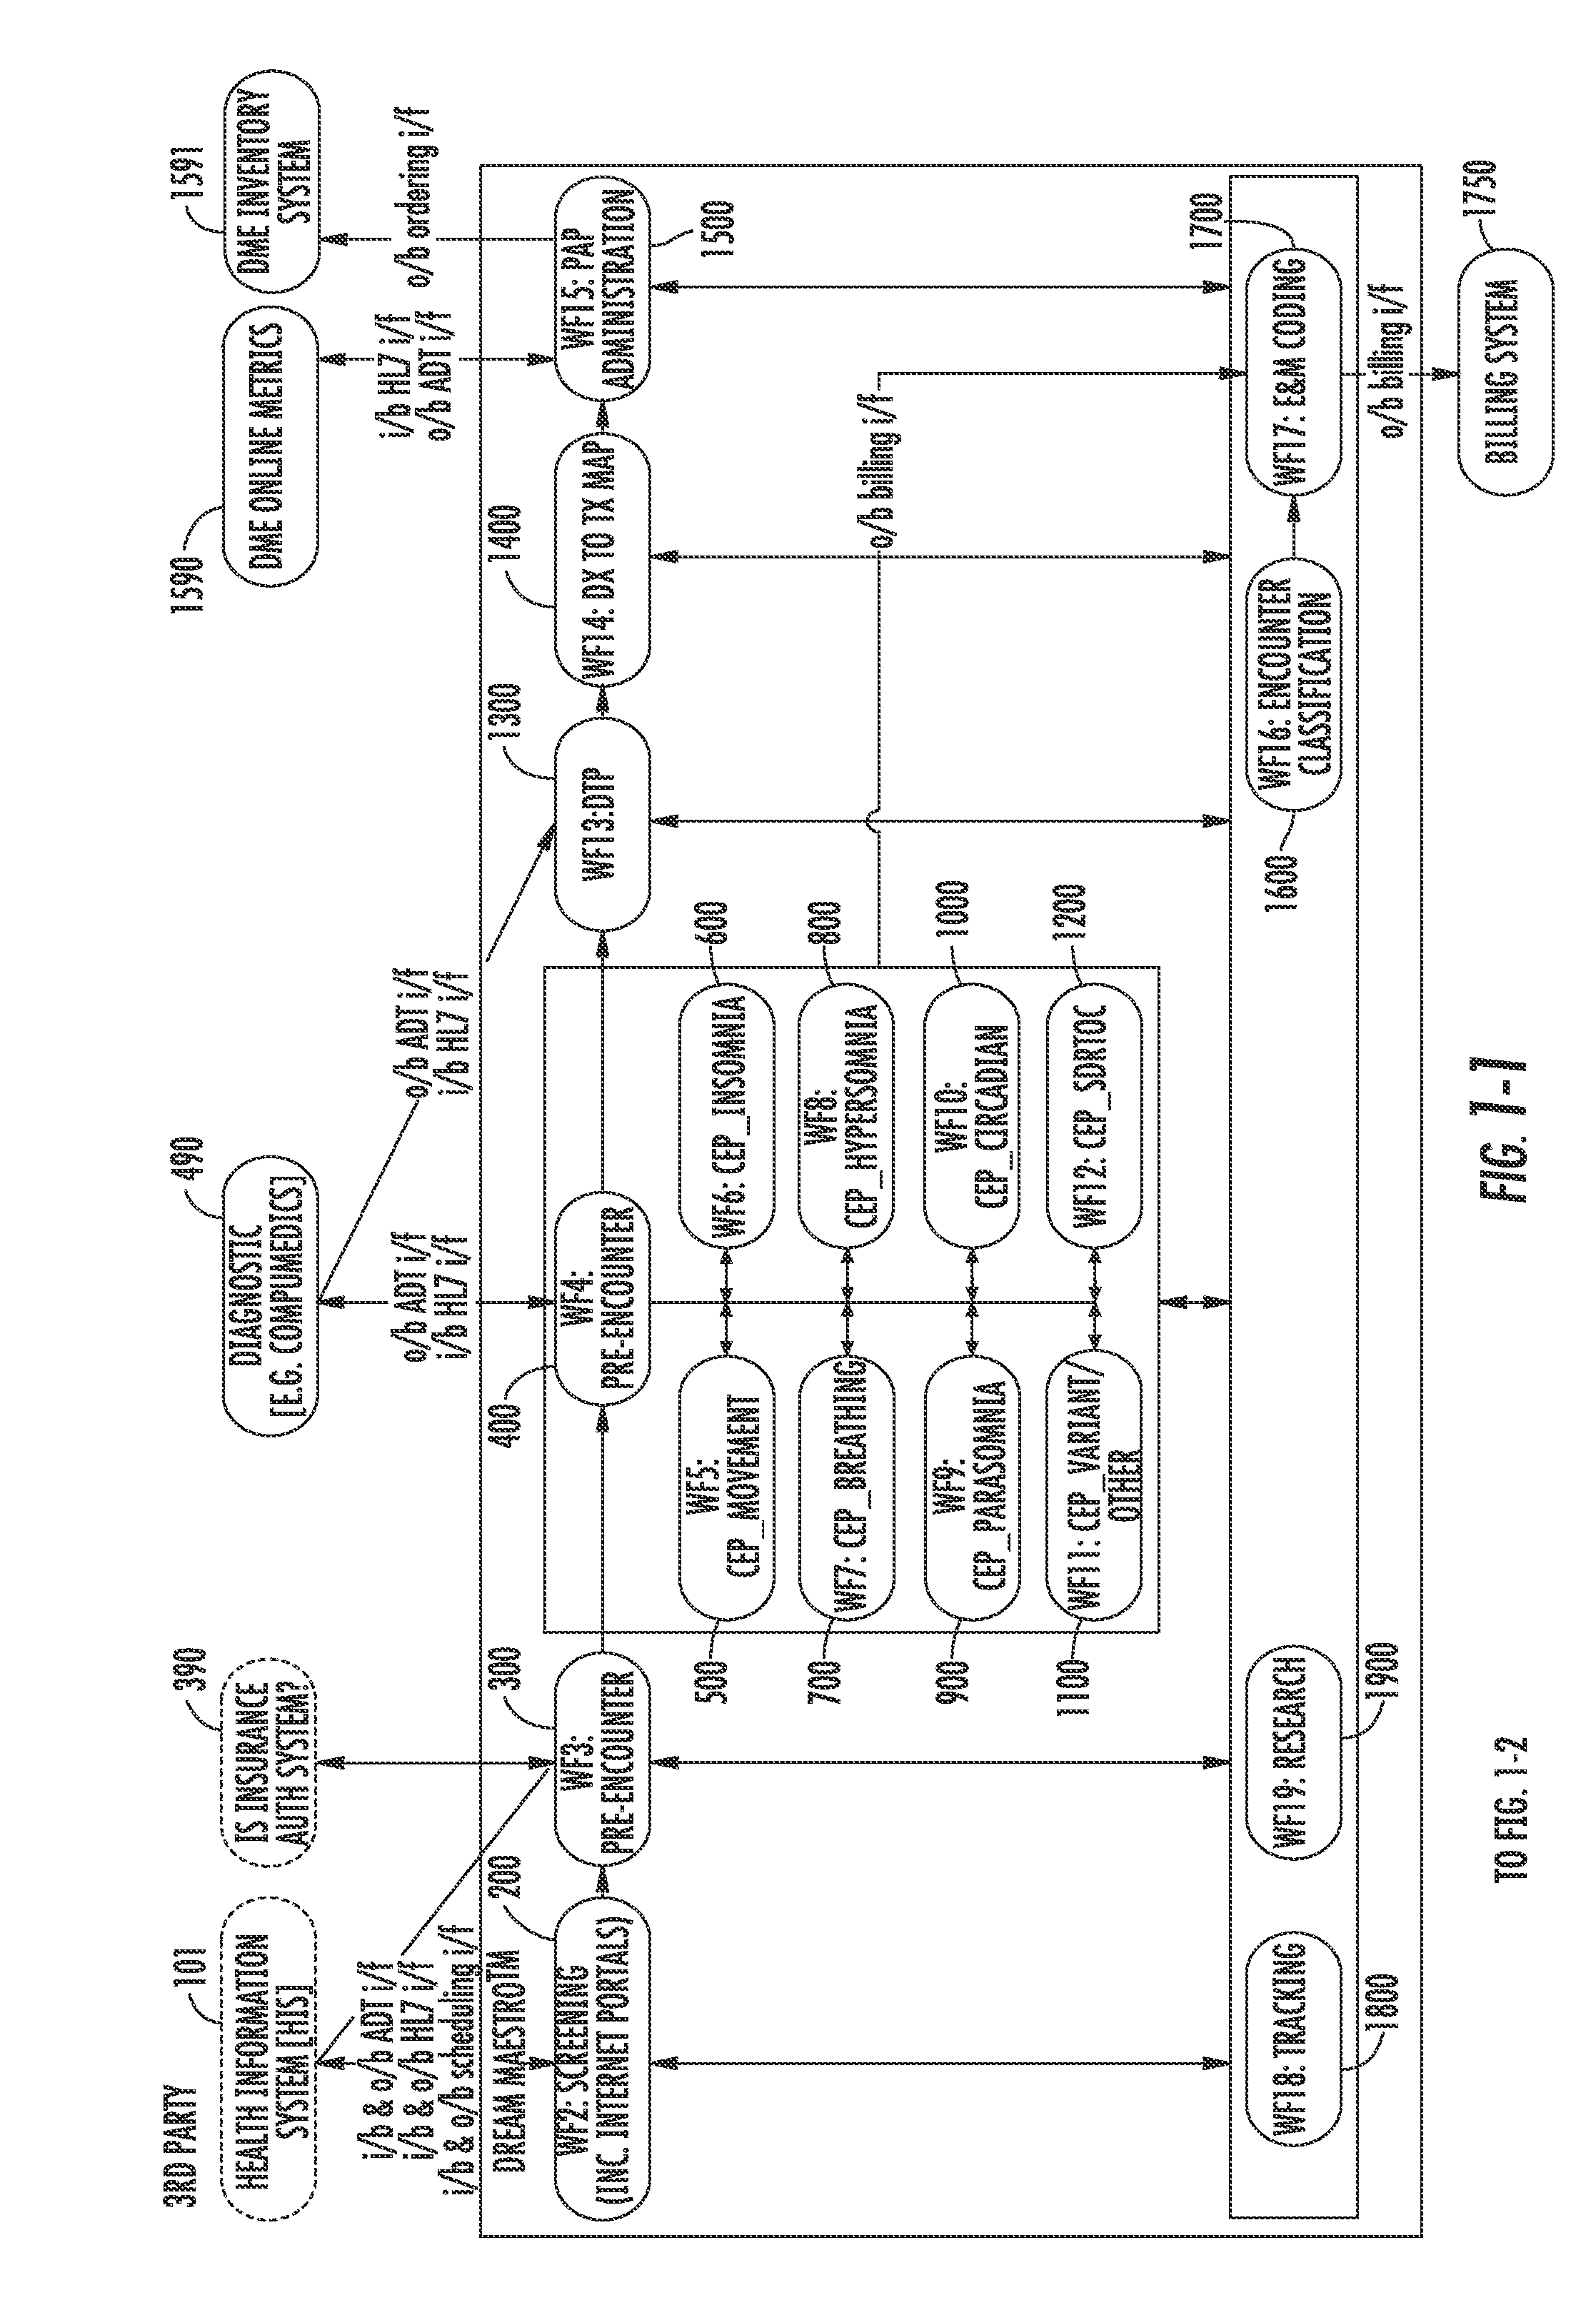 Method and system for identification and management of patients for sleep disorders